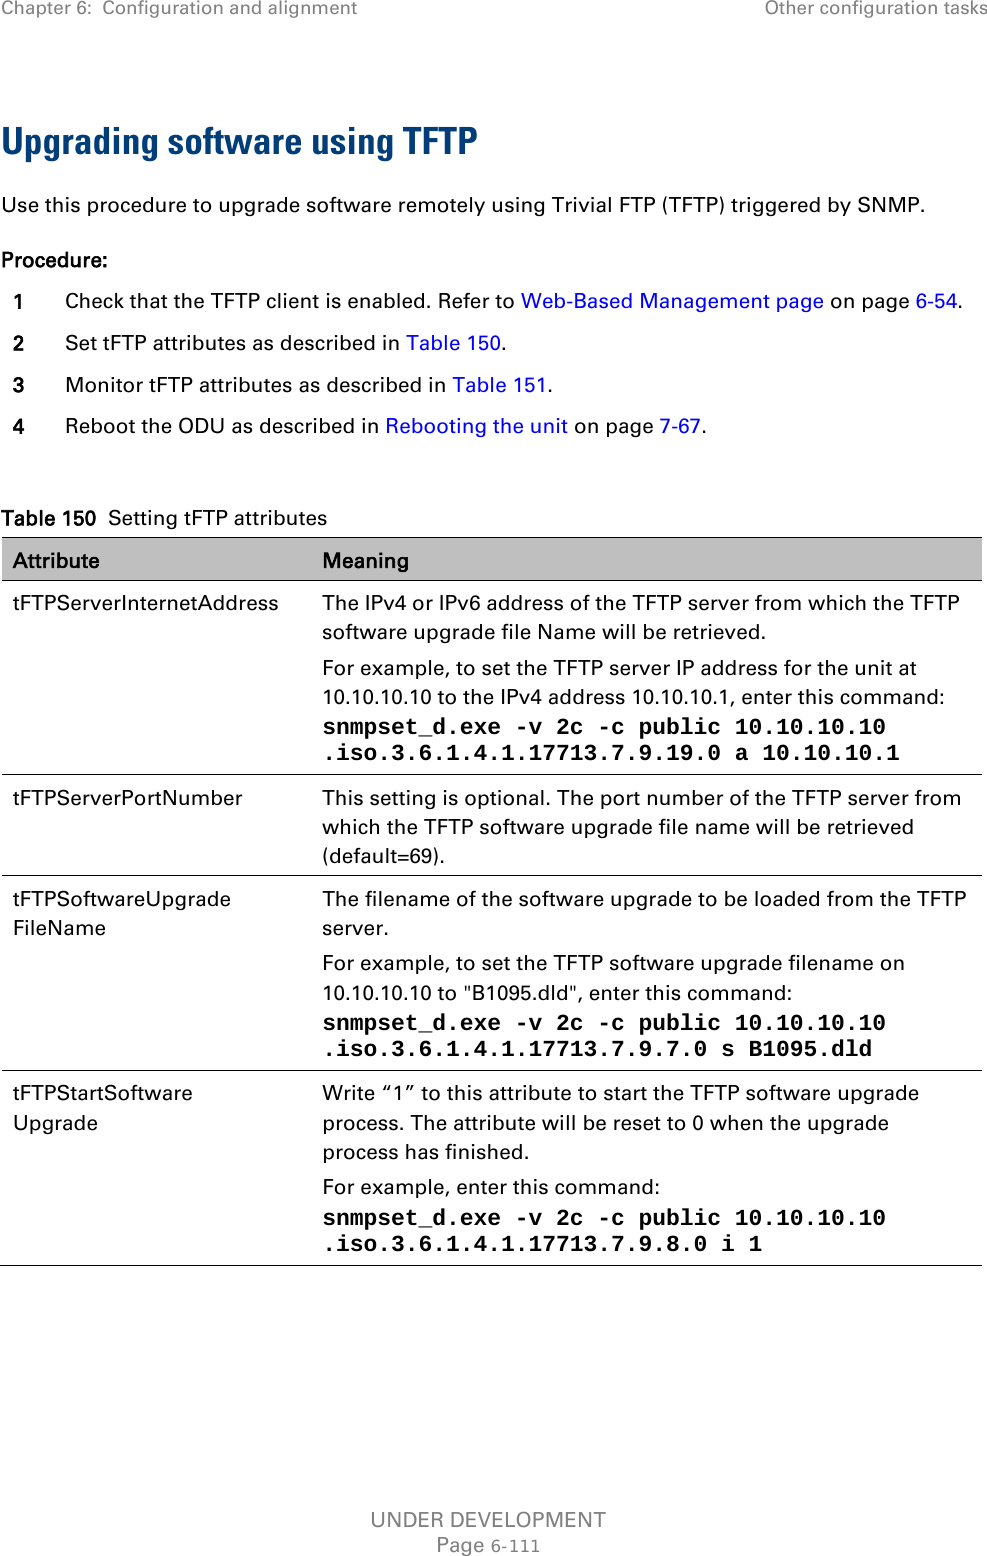 Chapter 6:  Configuration and alignment Other configuration tasks  Upgrading software using TFTP Use this procedure to upgrade software remotely using Trivial FTP (TFTP) triggered by SNMP. Procedure: 1 Check that the TFTP client is enabled. Refer to Web-Based Management page on page 6-54. 2 Set tFTP attributes as described in Table 150. 3 Monitor tFTP attributes as described in Table 151. 4 Reboot the ODU as described in Rebooting the unit on page 7-67.  Table 150  Setting tFTP attributes Attribute Meaning tFTPServerInternetAddress  The IPv4 or IPv6 address of the TFTP server from which the TFTP software upgrade file Name will be retrieved. For example, to set the TFTP server IP address for the unit at 10.10.10.10 to the IPv4 address 10.10.10.1, enter this command:  snmpset_d.exe -v 2c -c public 10.10.10.10 .iso.3.6.1.4.1.17713.7.9.19.0 a 10.10.10.1  tFTPServerPortNumber This setting is optional. The port number of the TFTP server from which the TFTP software upgrade file name will be retrieved (default=69). tFTPSoftwareUpgrade FileName The filename of the software upgrade to be loaded from the TFTP server. For example, to set the TFTP software upgrade filename on 10.10.10.10 to &quot;B1095.dld&quot;, enter this command: snmpset_d.exe -v 2c -c public 10.10.10.10 .iso.3.6.1.4.1.17713.7.9.7.0 s B1095.dld tFTPStartSoftware Upgrade Write “1” to this attribute to start the TFTP software upgrade process. The attribute will be reset to 0 when the upgrade process has finished. For example, enter this command: snmpset_d.exe -v 2c -c public 10.10.10.10 .iso.3.6.1.4.1.17713.7.9.8.0 i 1     UNDER DEVELOPMENT Page 6-111 